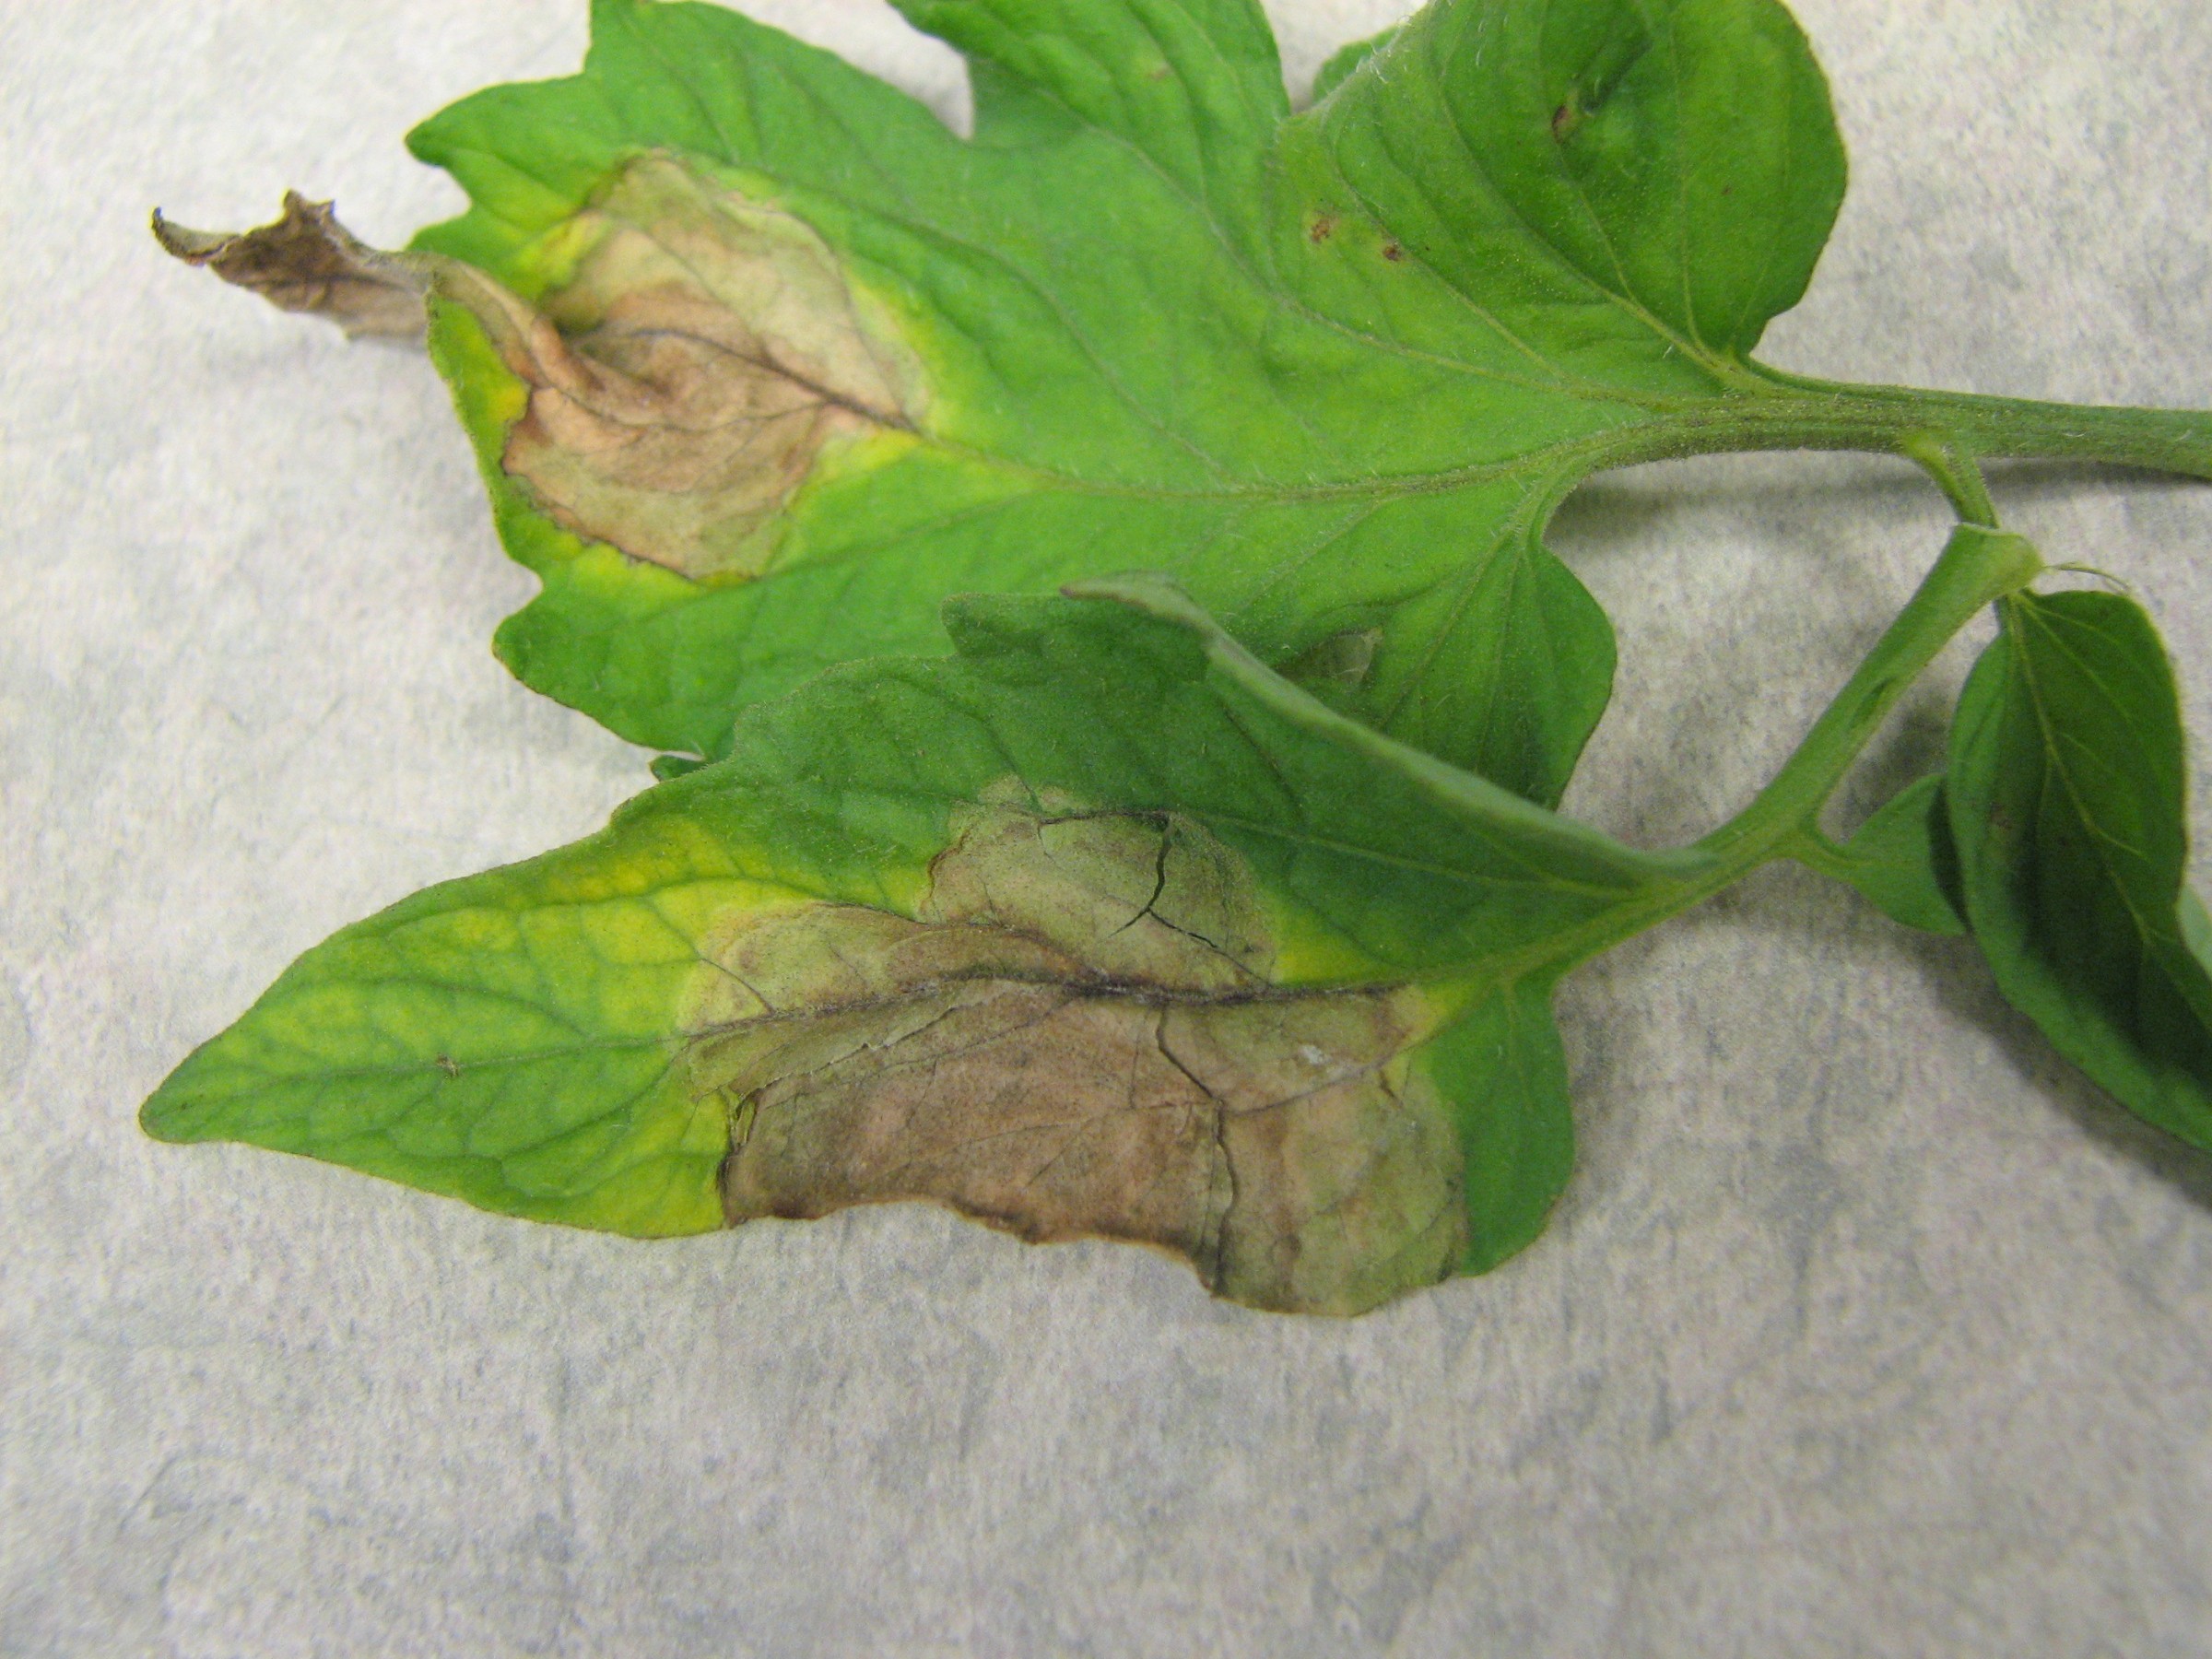 Fight Fungal Diseases on Your Plants with Daconil and Copper Fungicides